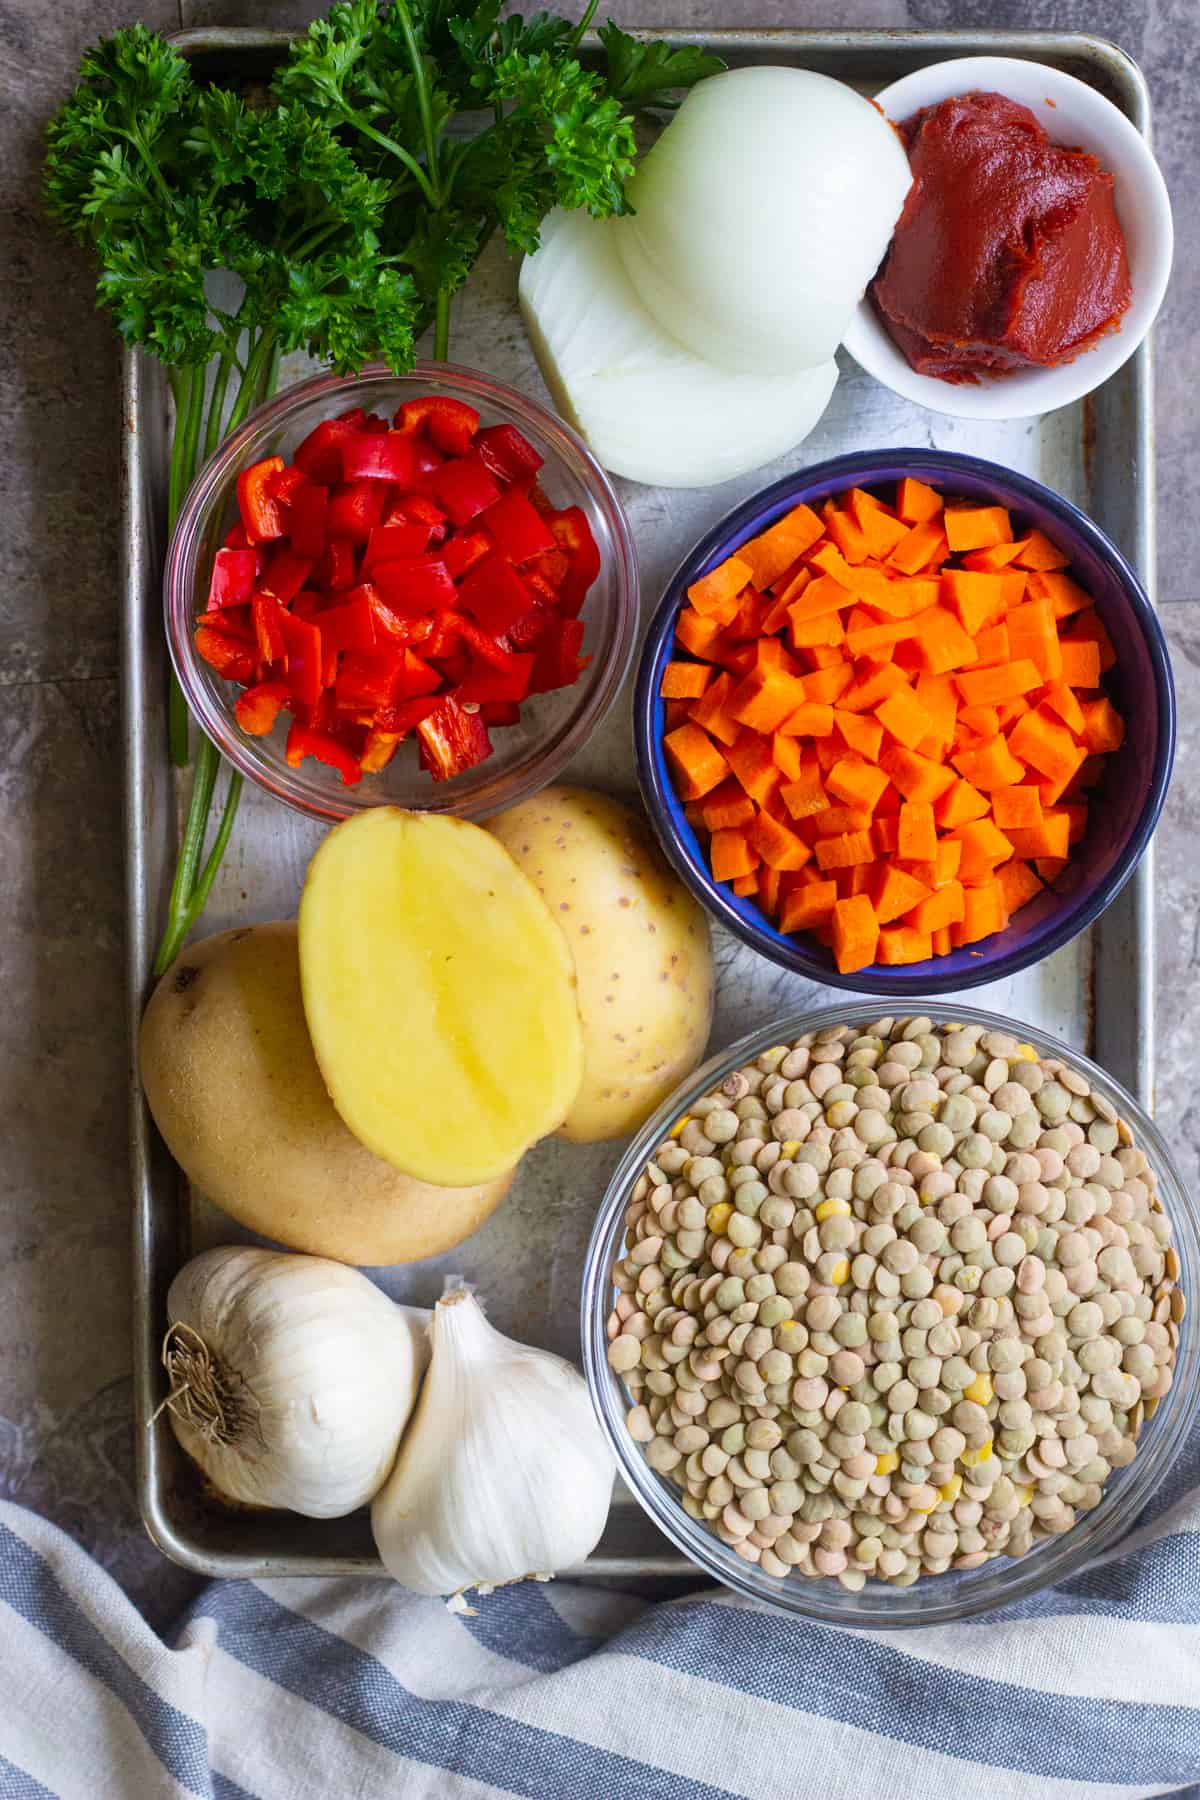 The ingredients to make this green lentil soup are lentils, carrots, onions, potatoes, garlic and spices. 